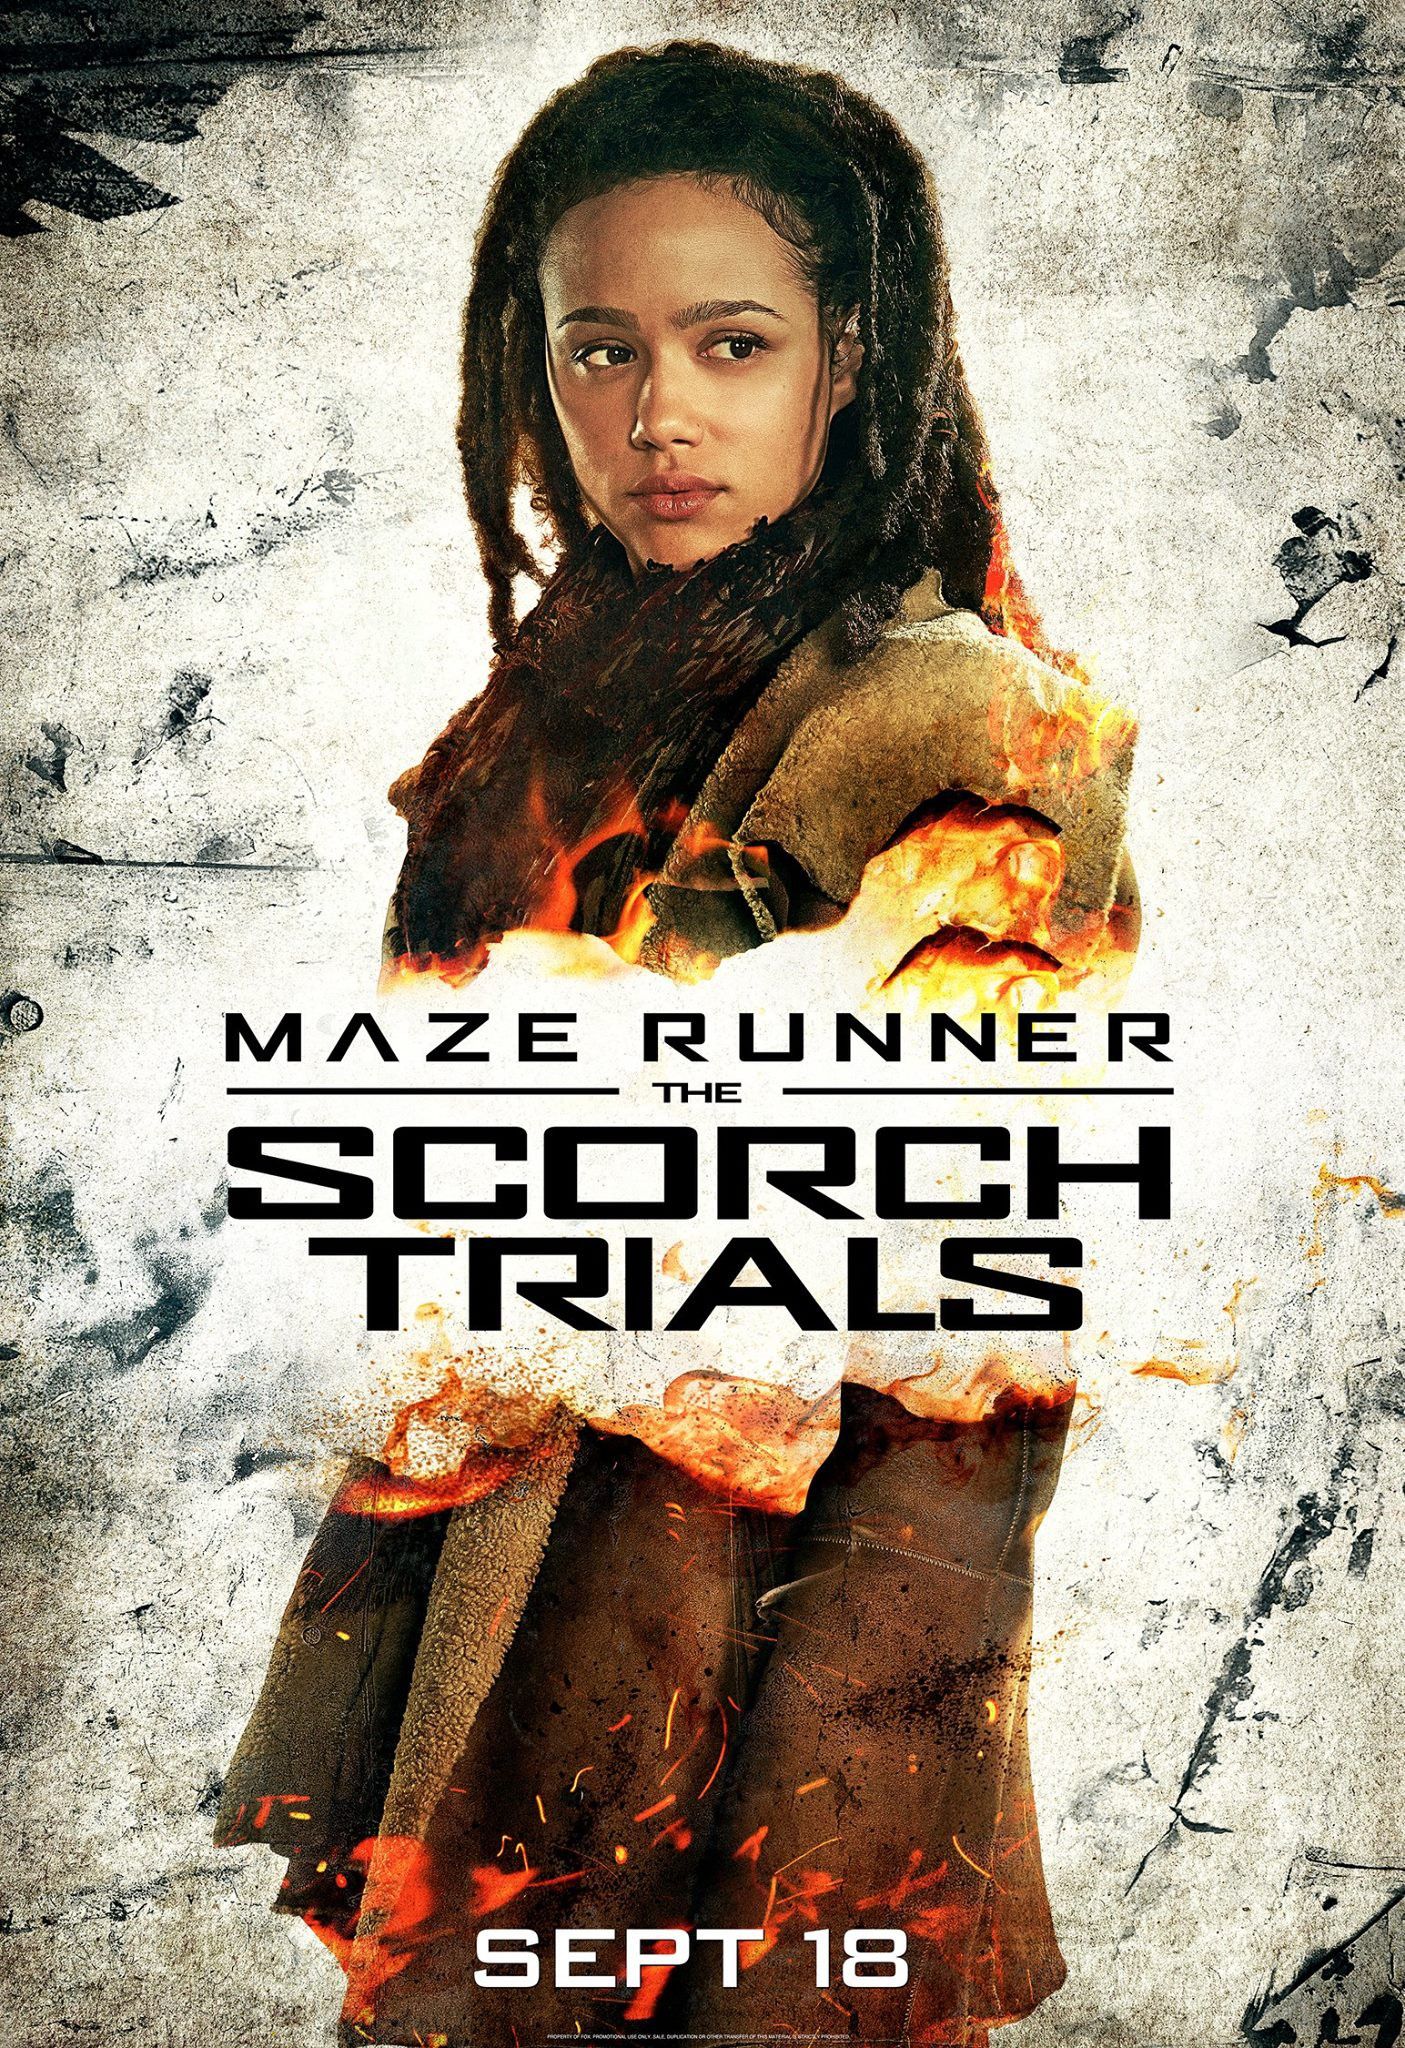 The Maze Runner Scorch Trials Character Poster 5